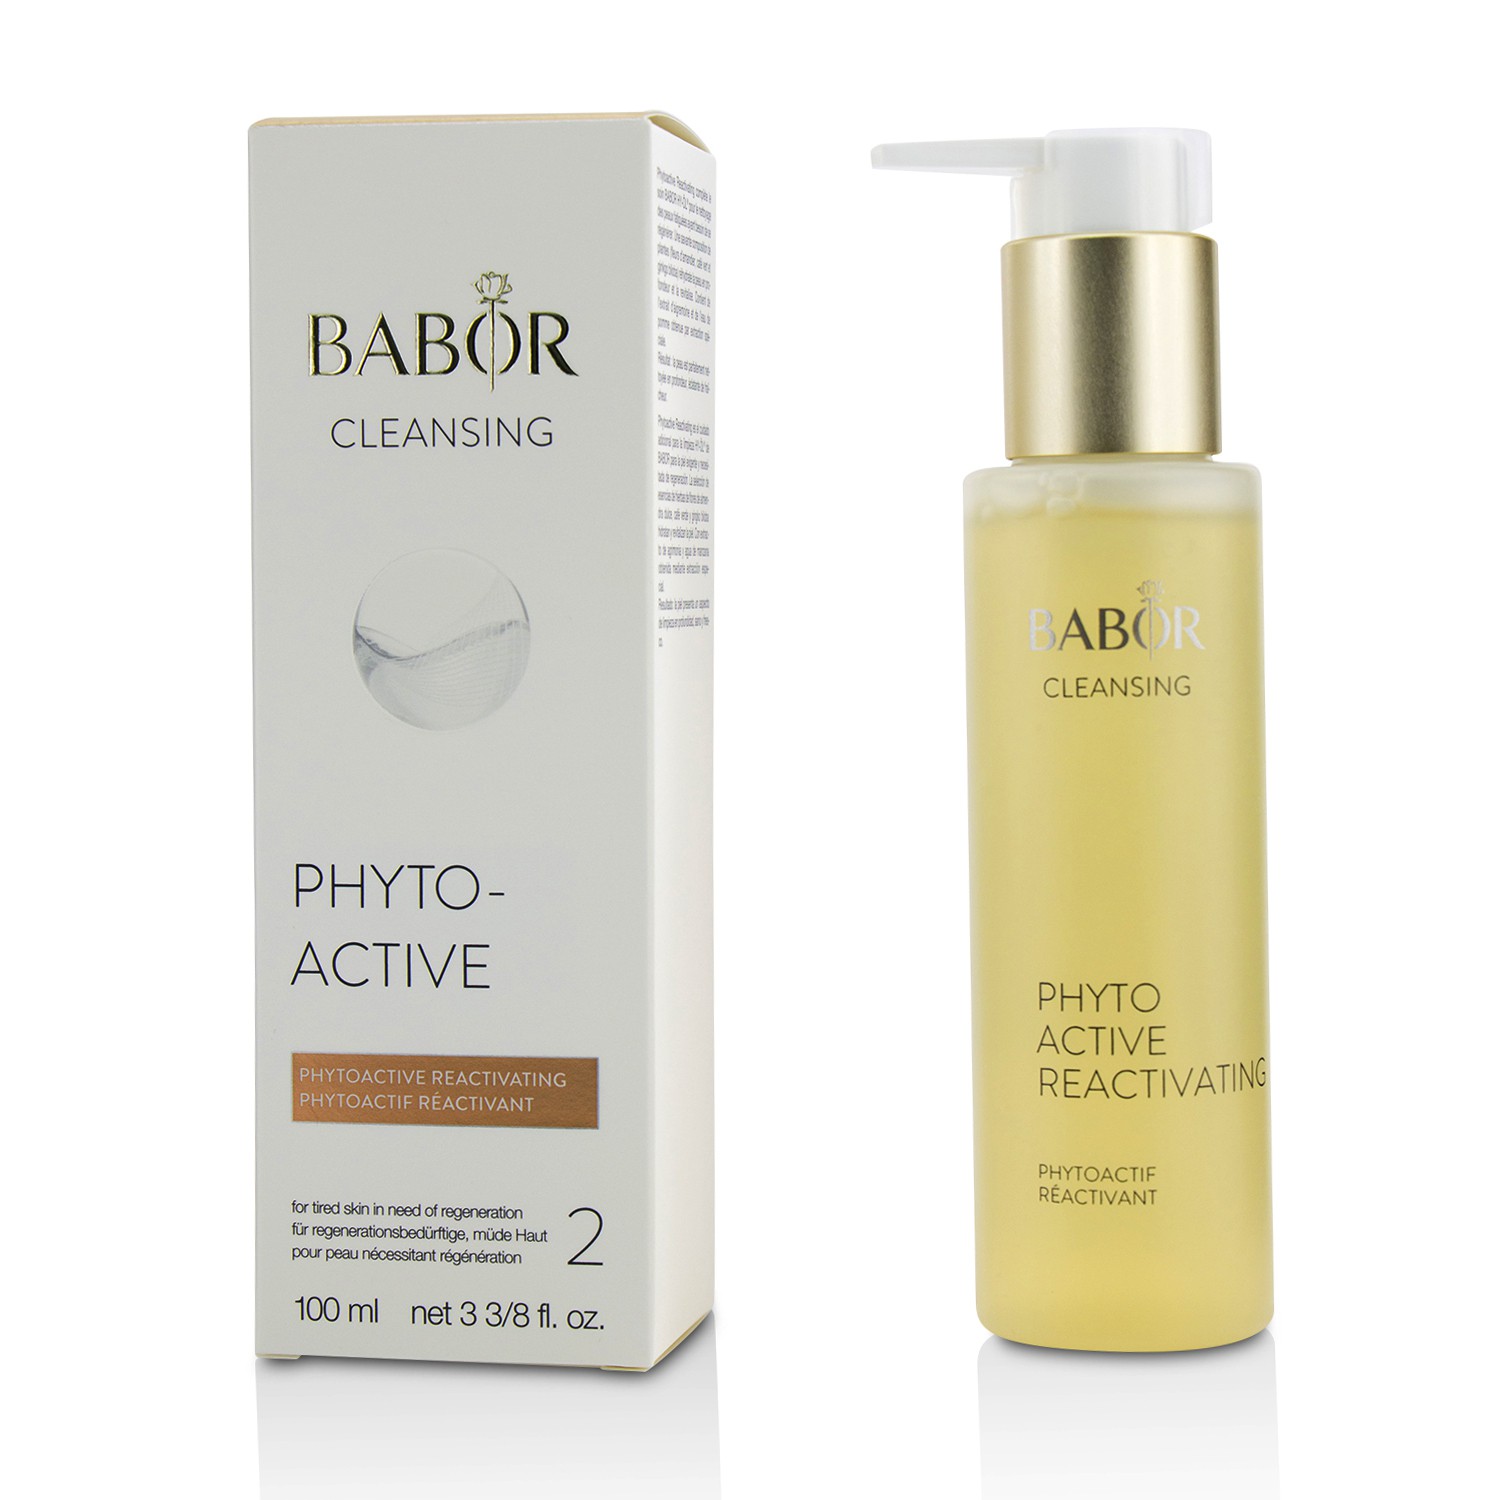 CLEANSING Phytoactive Reactivating Babor Image